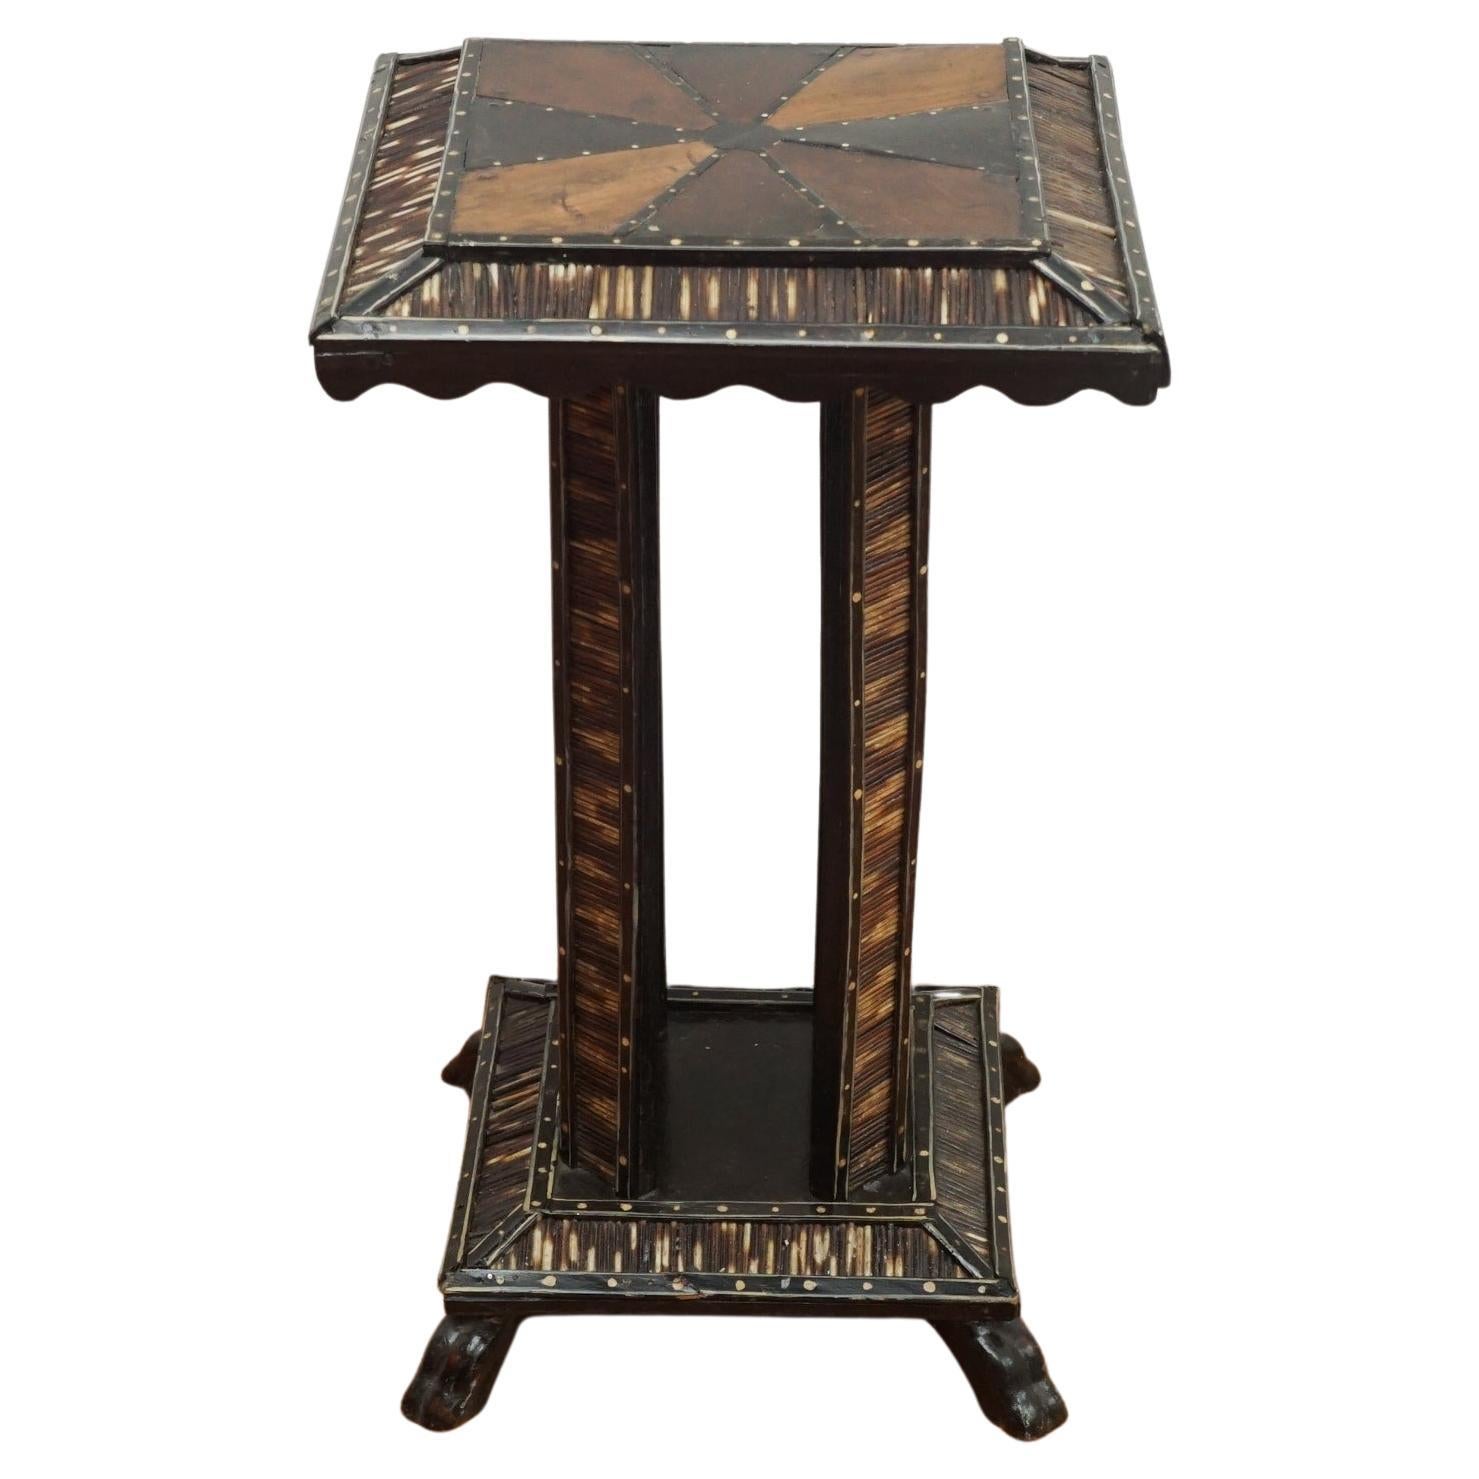 Anglo-Indian Accent Table with Ebony and Quill Detailing